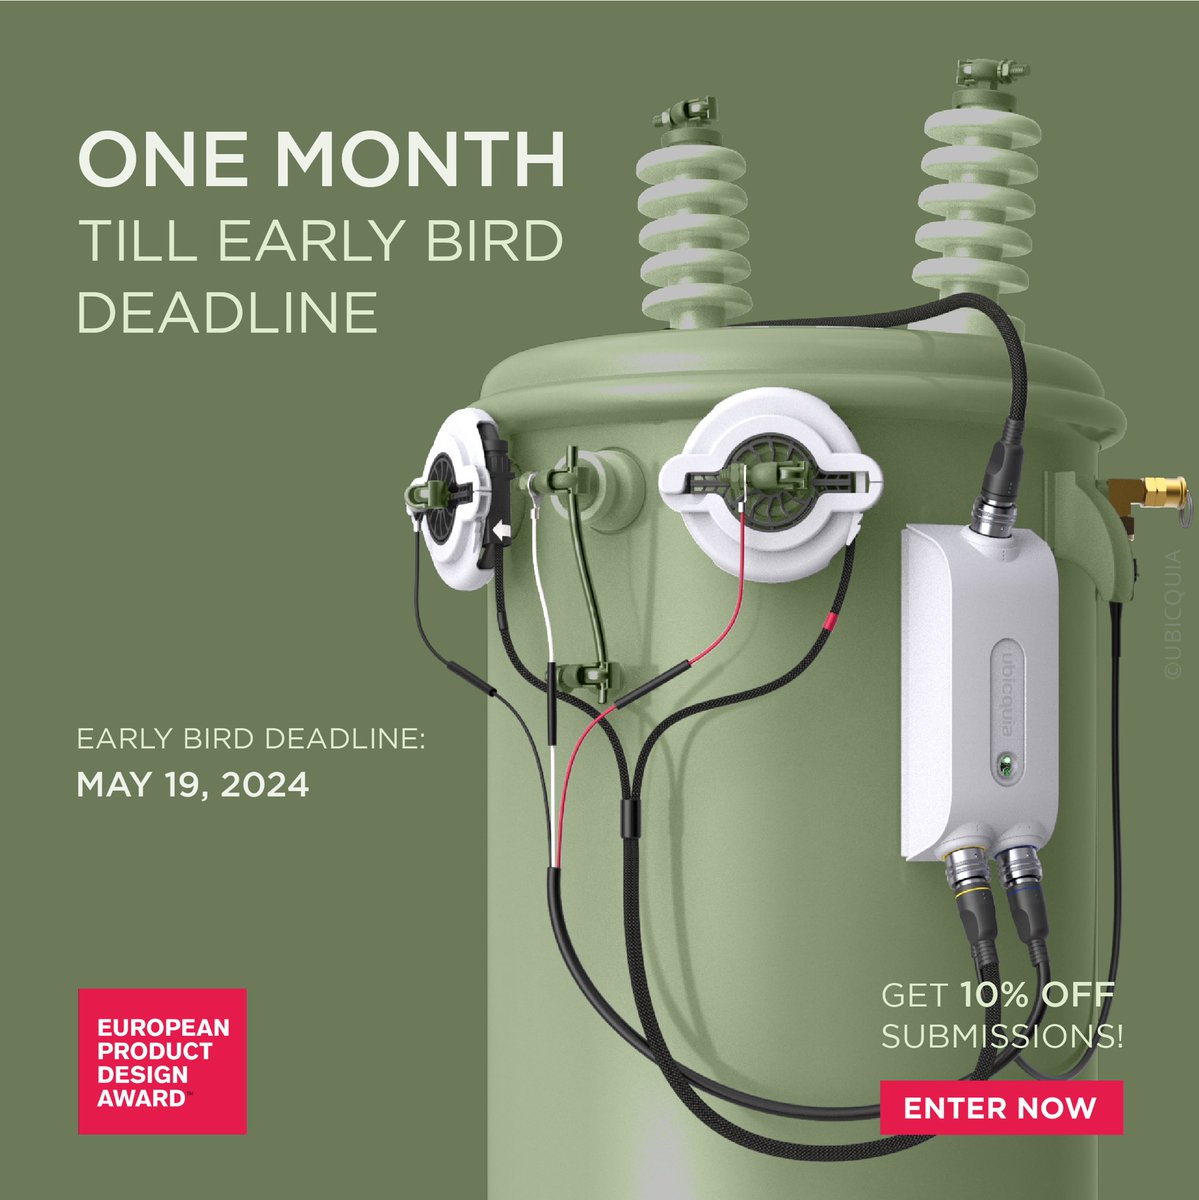 ❕EARLY BIRD DEADLINE IN ONE MONTH - May 19, 2024. Submit till the deadline to get 10% off entry fees! Enter now ➡️ productdesignaward.eu
⁠
📸: Ubicquia
⁠
#ePDA2024 #ProductDesign #ProductDesigners #OpenCall